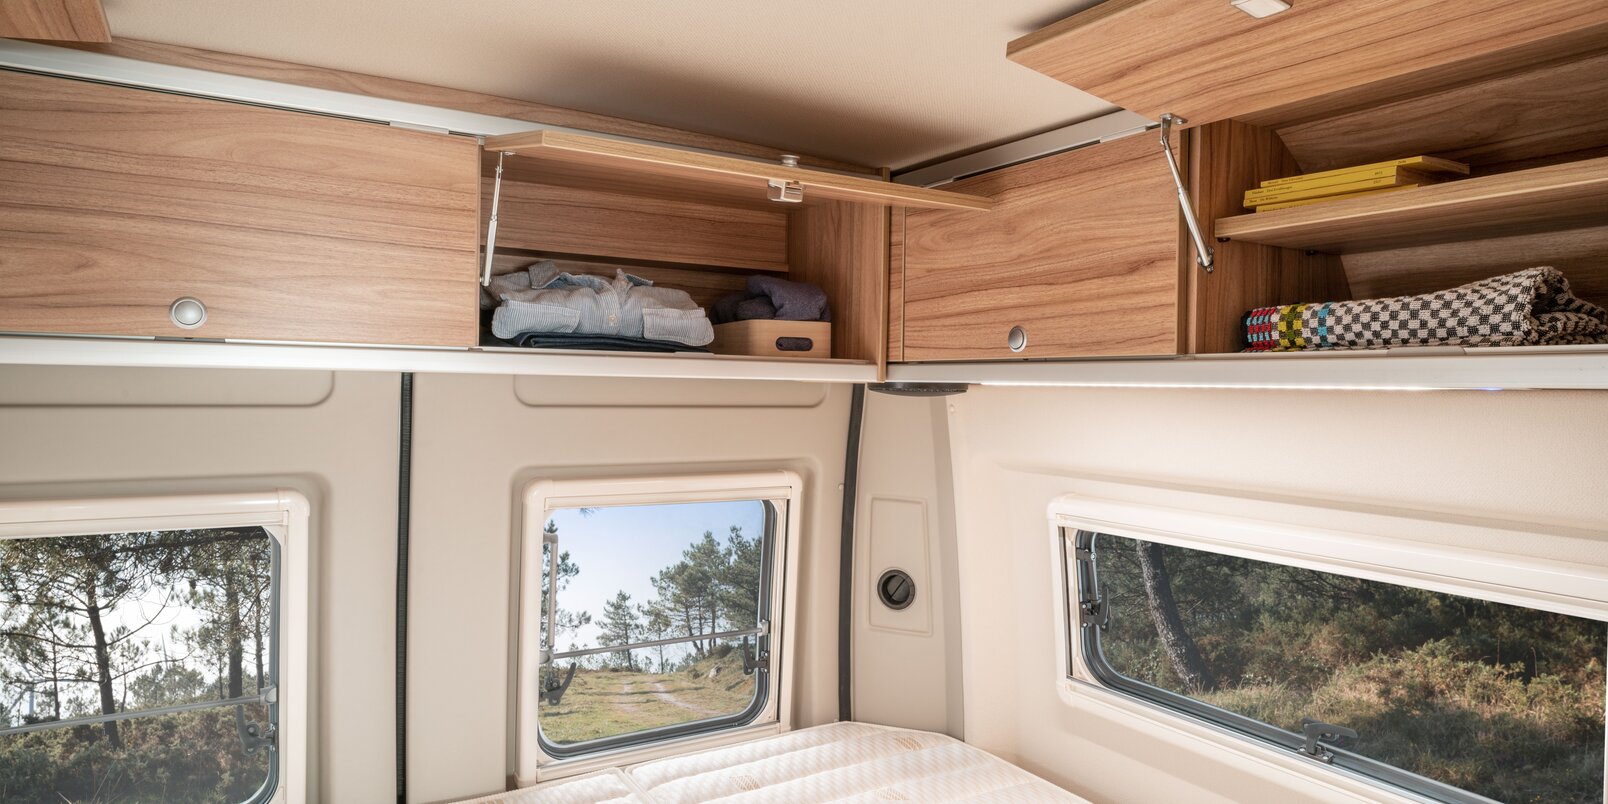 Overhead lockers above the bed area and side wall / rear window in the HYMER Camper Van is partially open